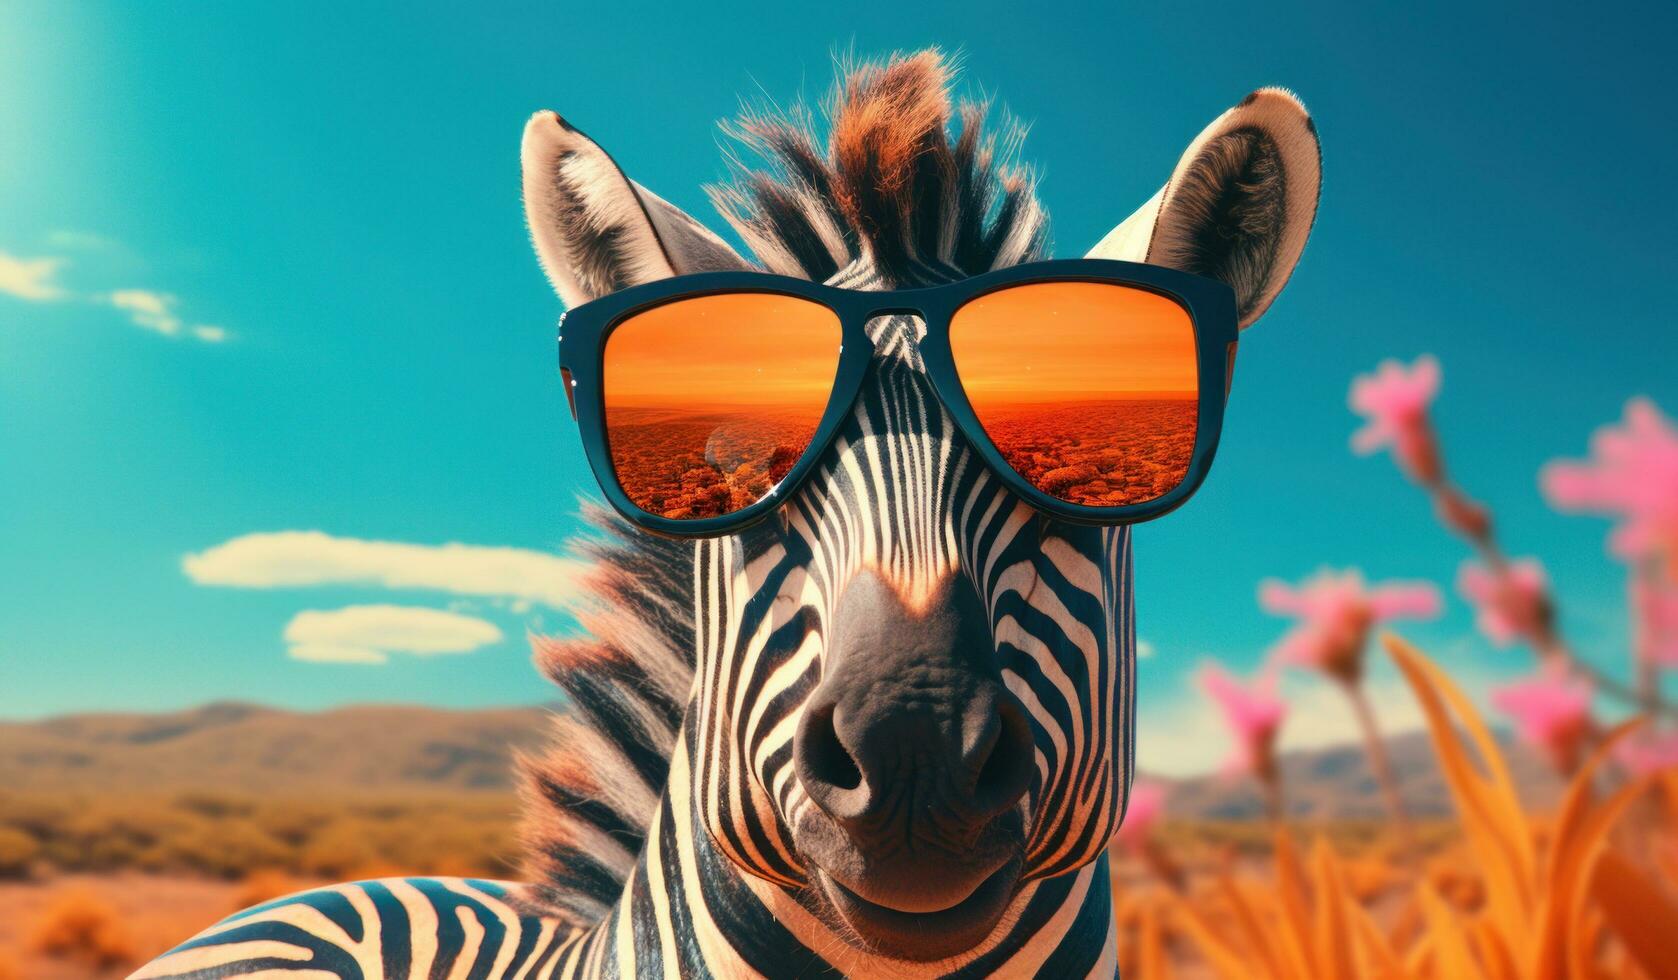 AI generated funny zebra wearing sunglasses over the eyes with text caption about zebras photo